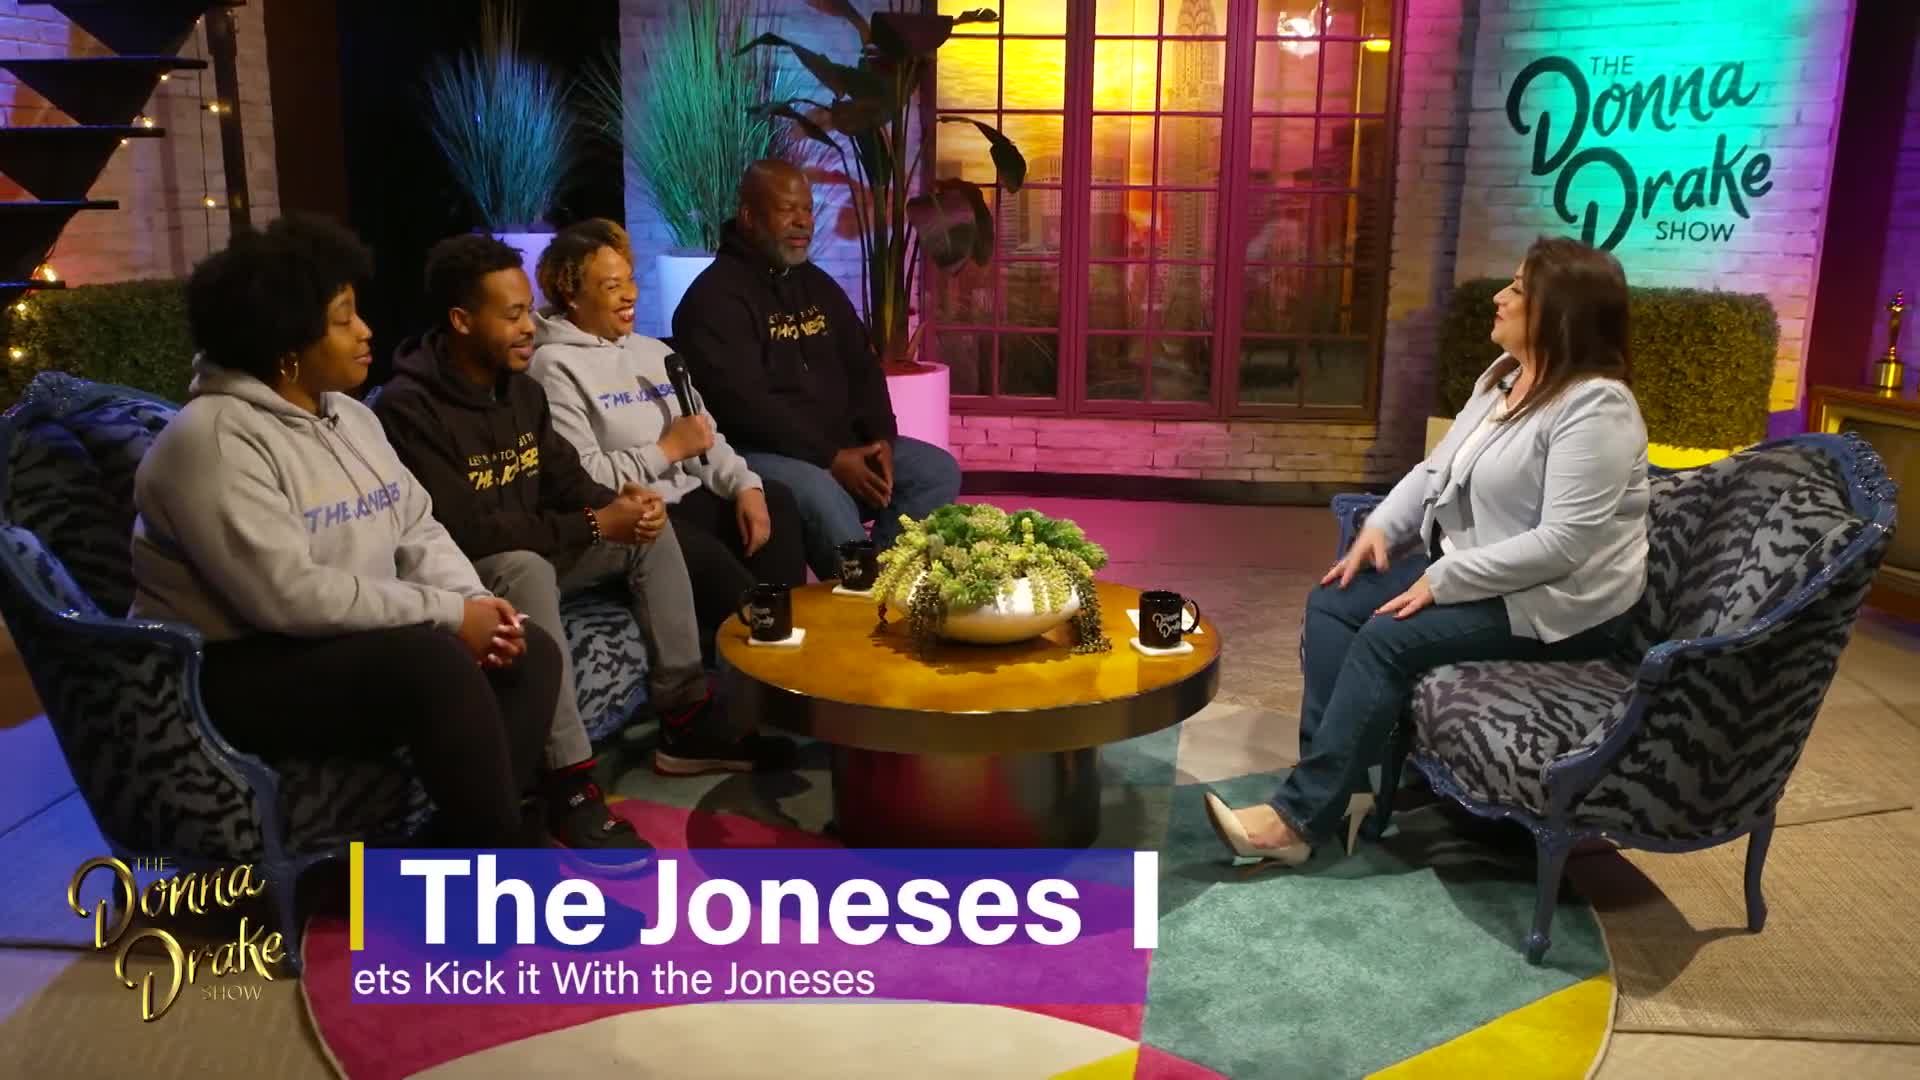 The Donna Drake Show Welcomes The Joneses